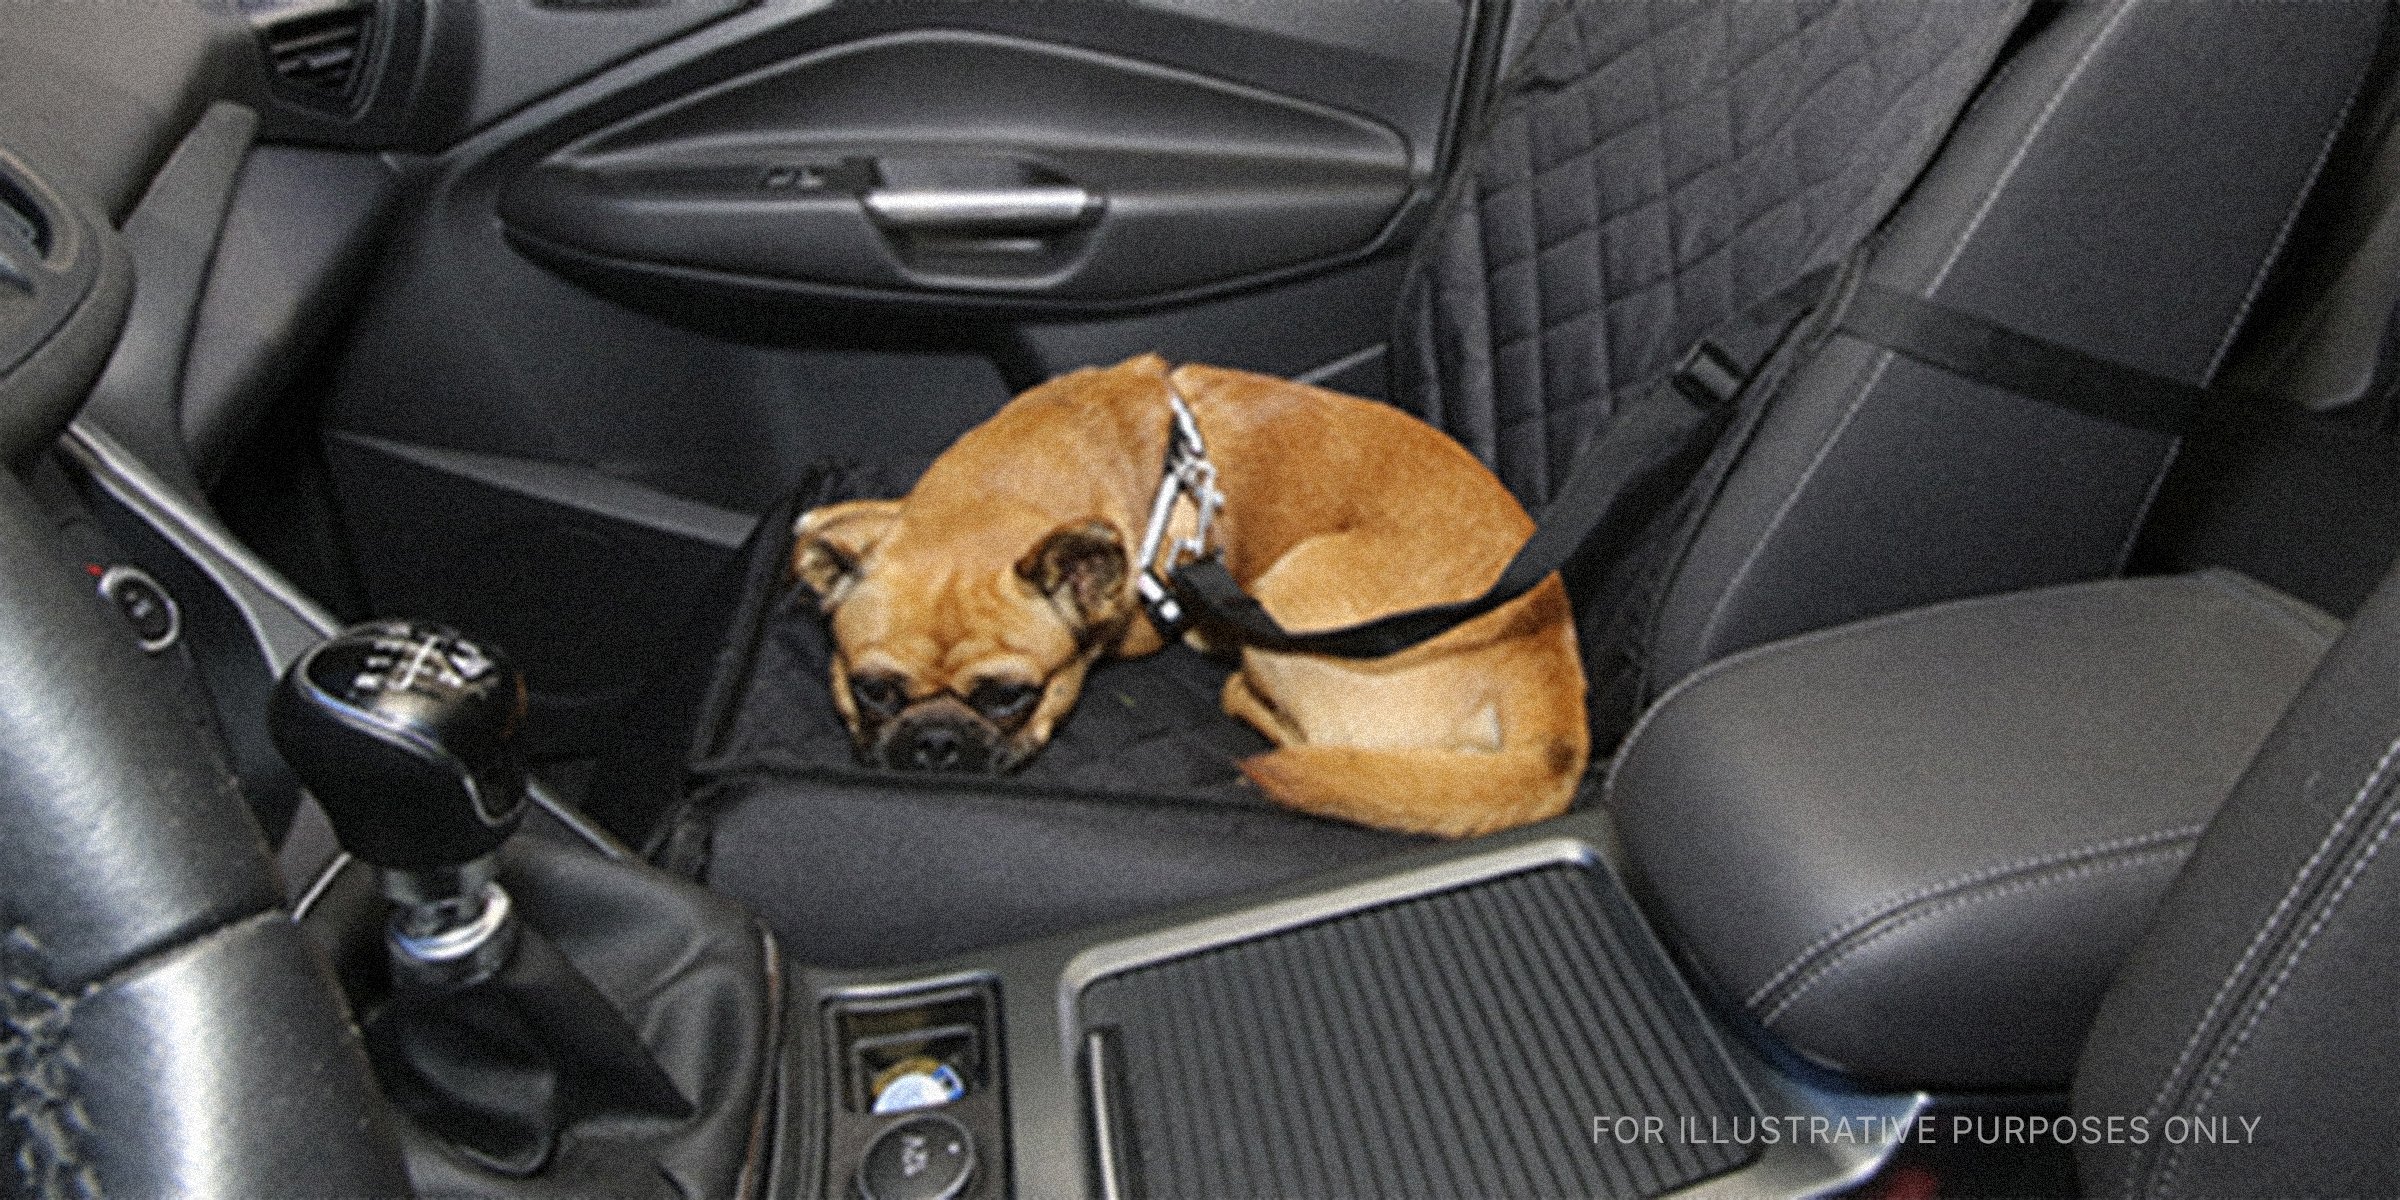 A dog sitting in a car | Source: Flickr/Seattle Parks & Recreation (CC BY 2.0)